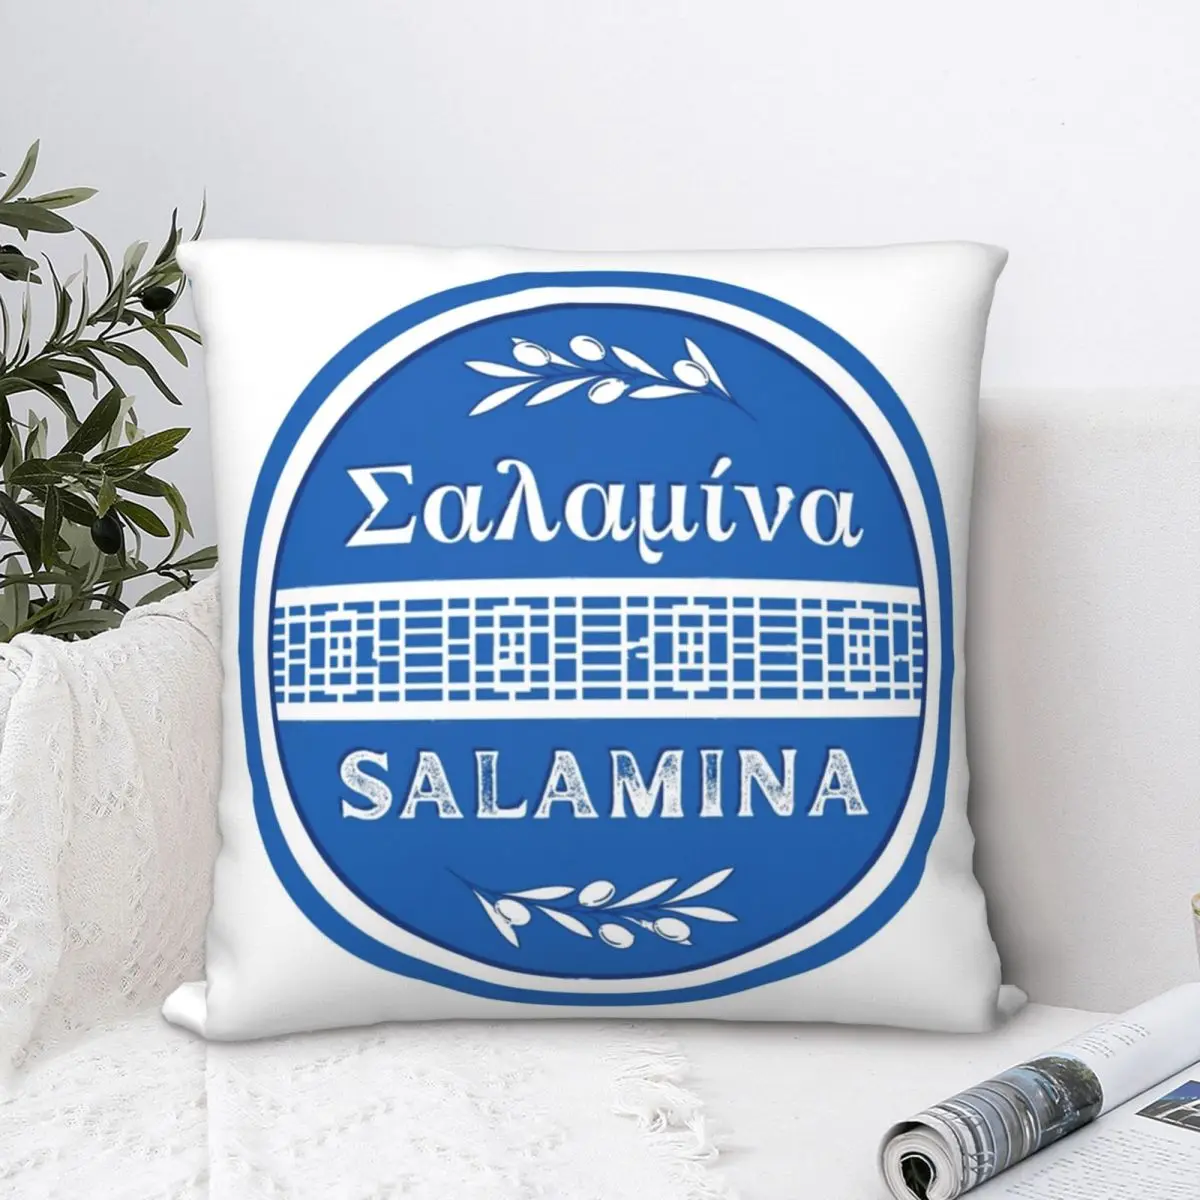 Greek Island Of Salamina Square Pillowcase Polyester Pillow Cover Velvet Cushion Zip Decorative Comfort Throw Pillow for home flag of india square pillowcase cushion cover funny zip home decorative polyester pillow case bed nordic 45 45cm